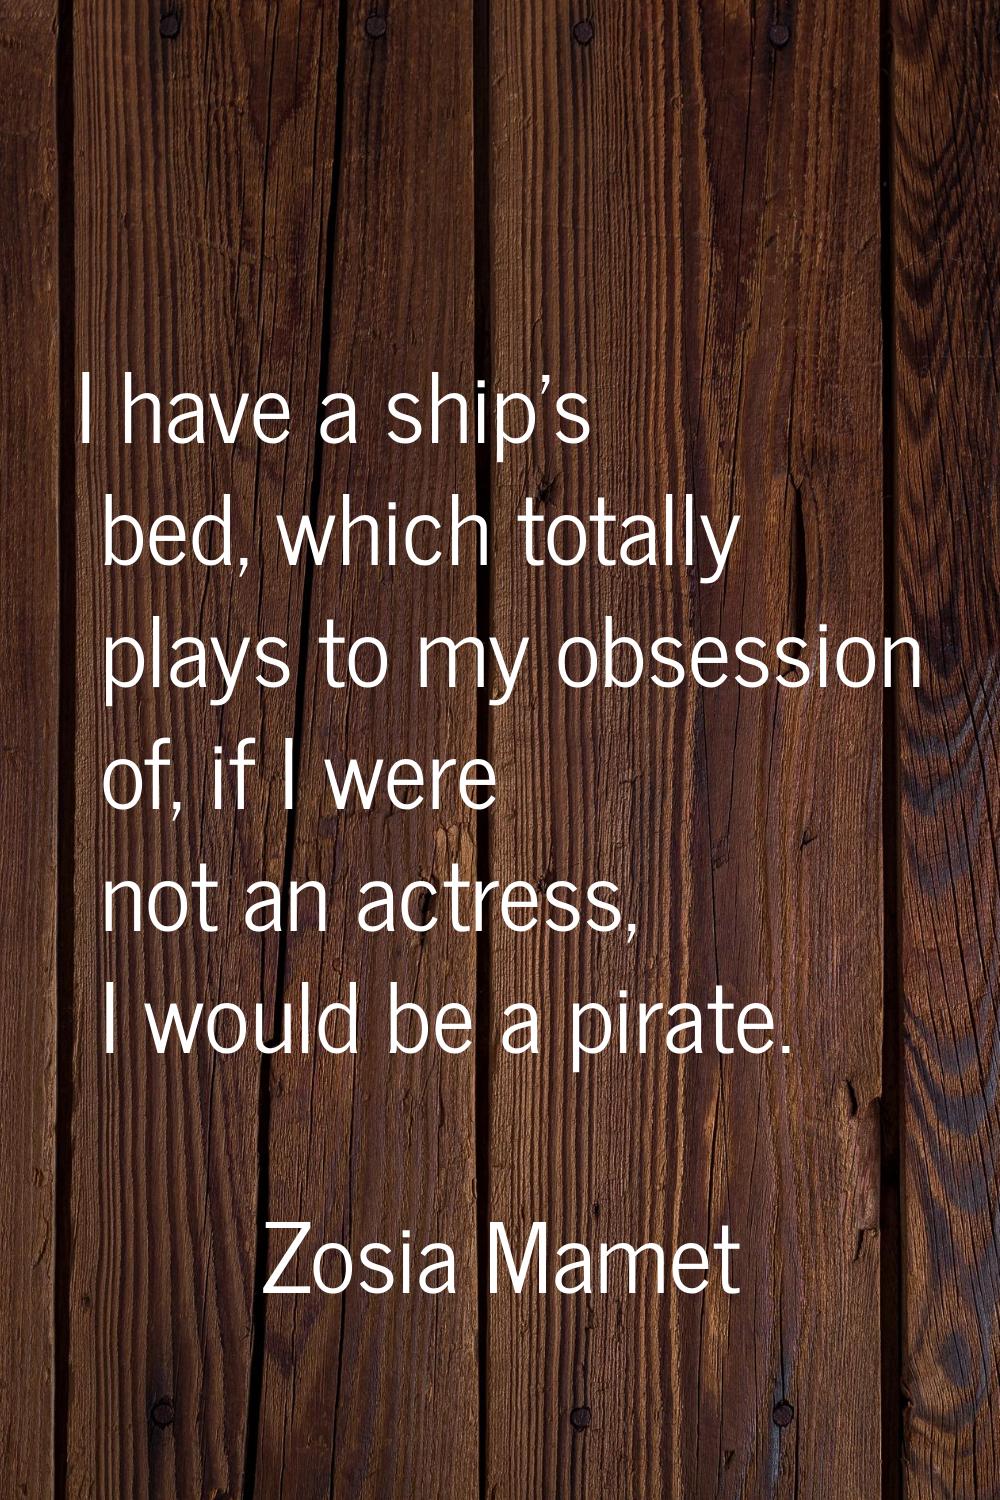 I have a ship's bed, which totally plays to my obsession of, if I were not an actress, I would be a